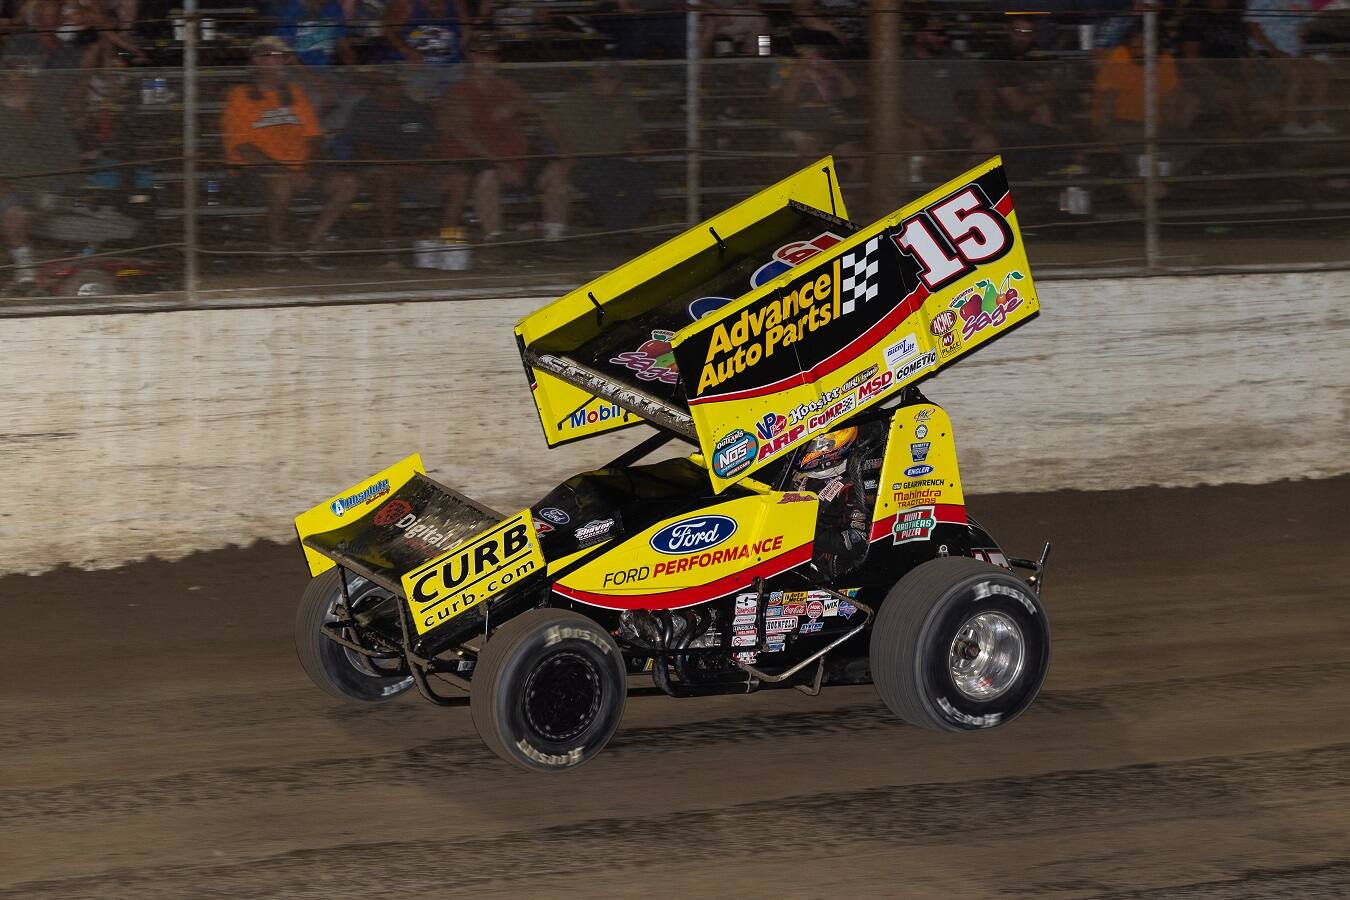 The World of Outlaws series continues Wednesday at the Knoxville Nationals in Knoxville, Iowa. 